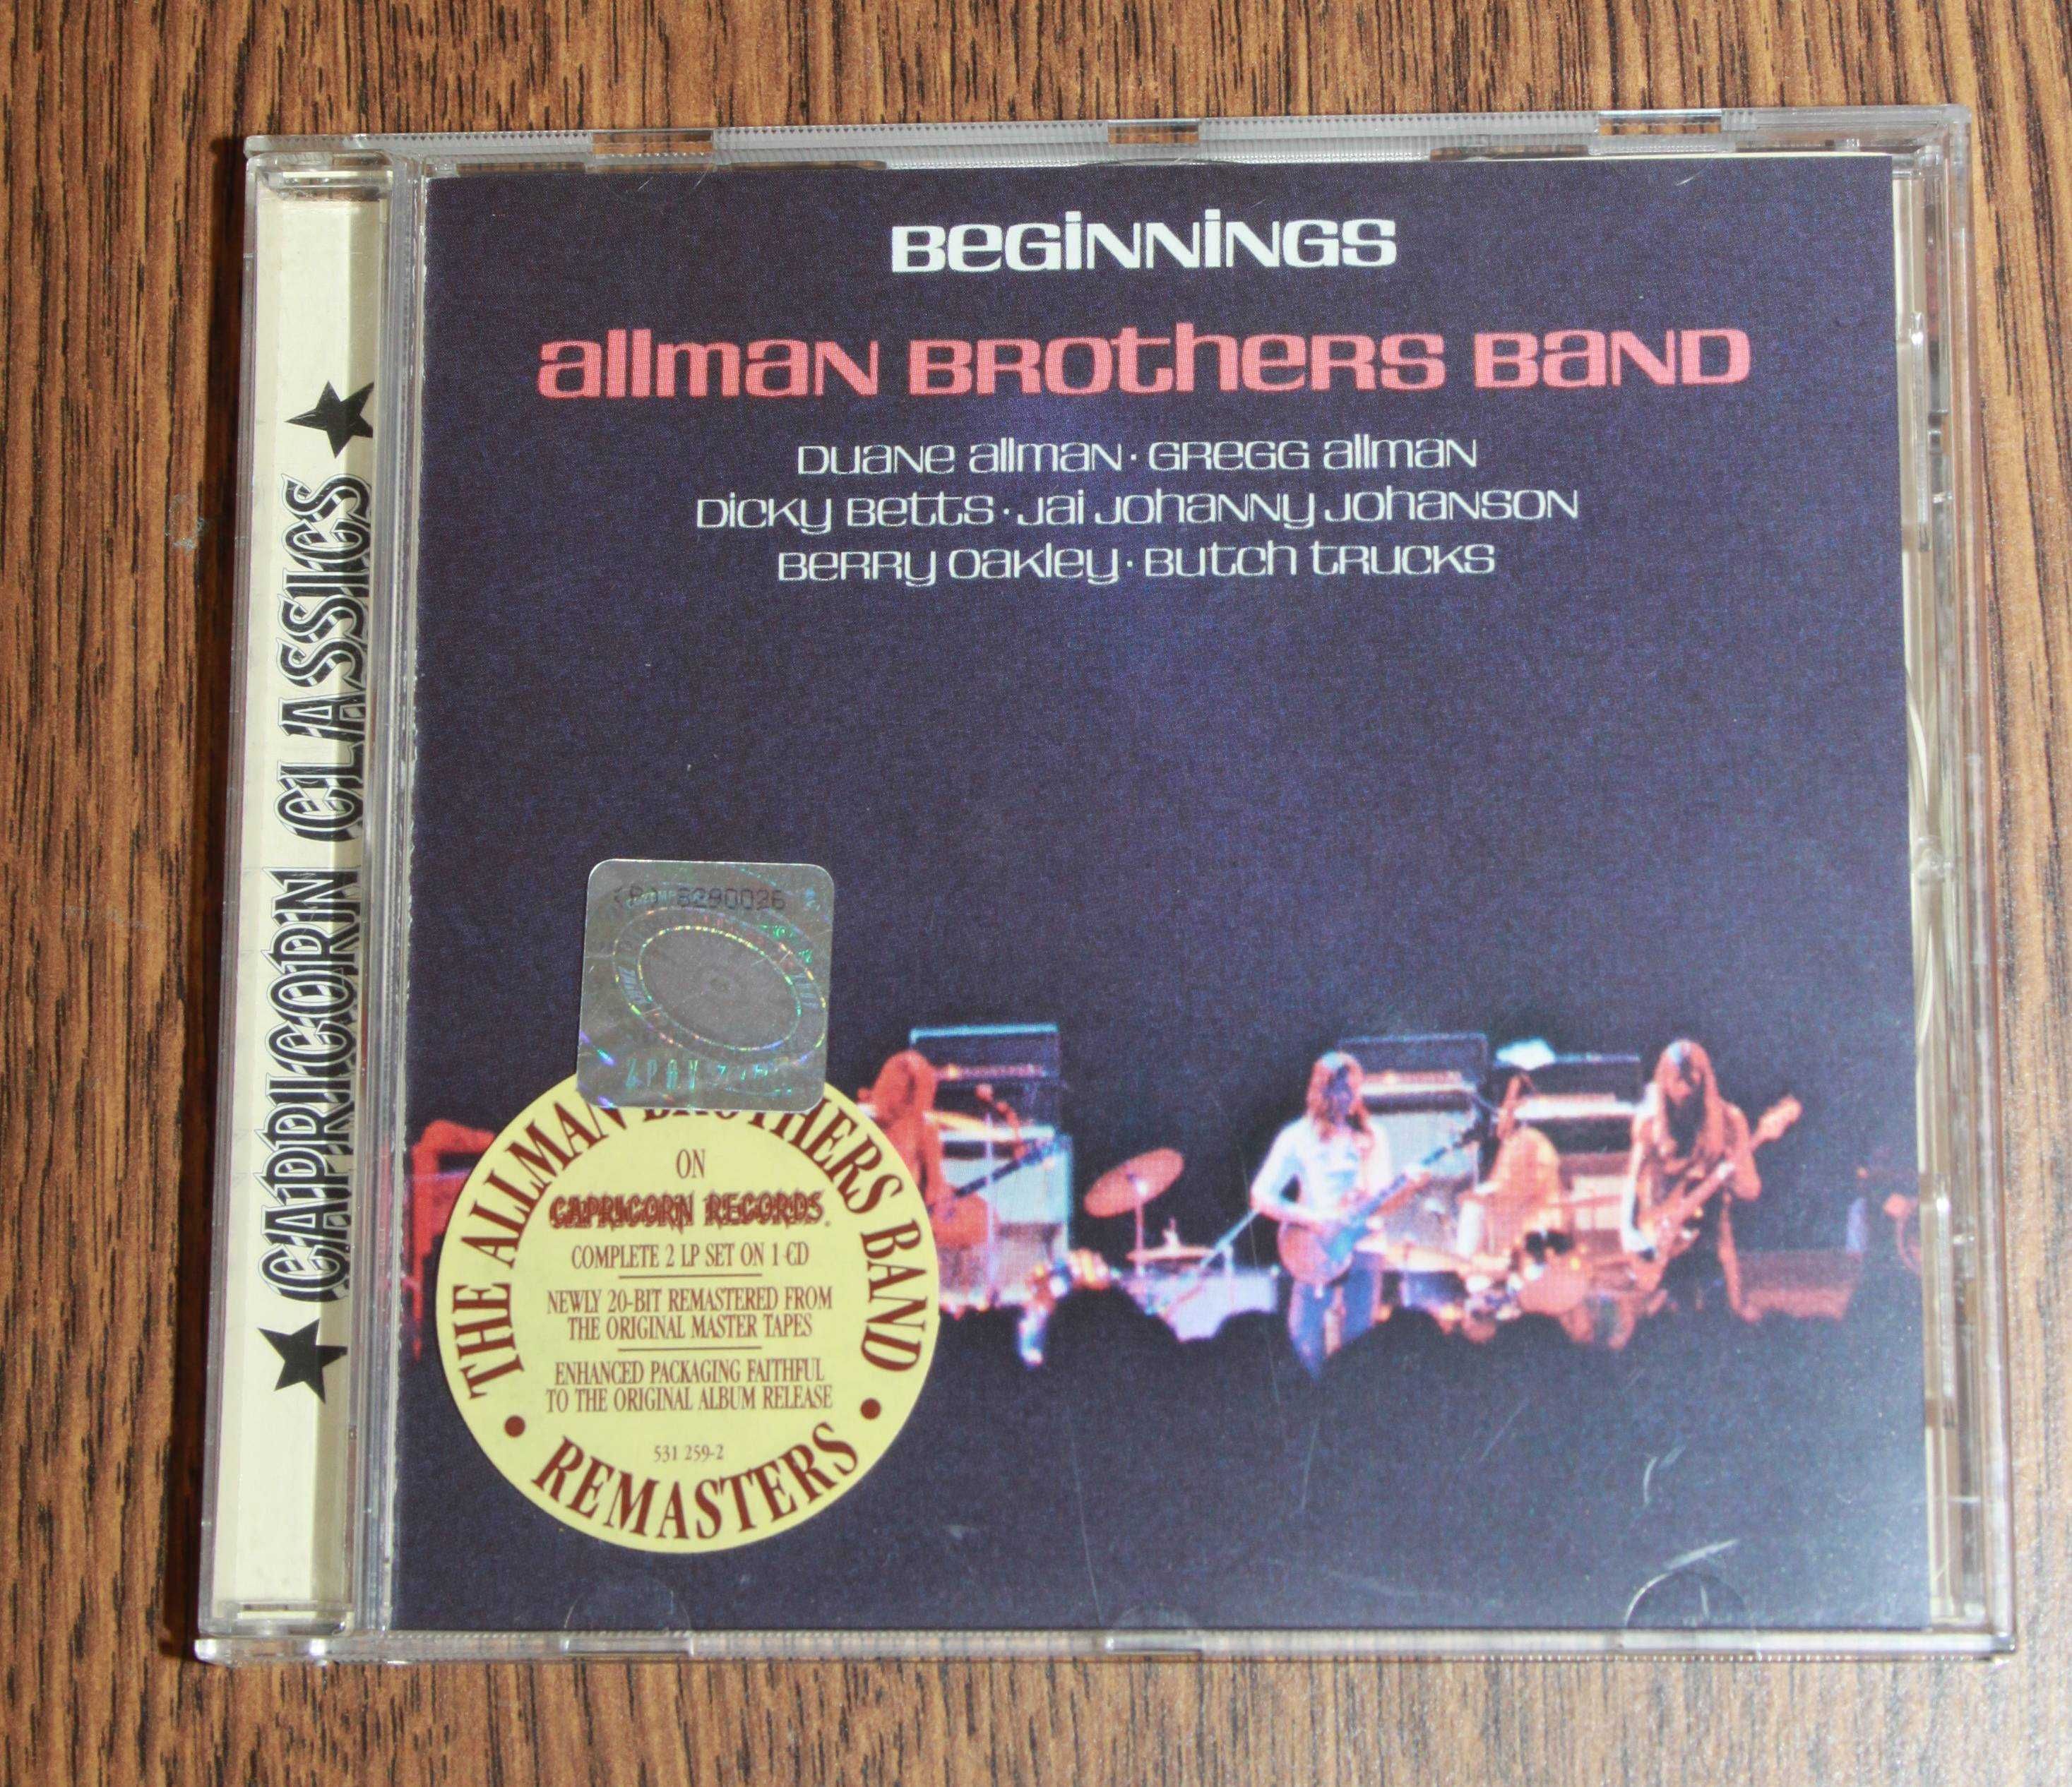 The Allman Brothers Band - Beginnings (CD)